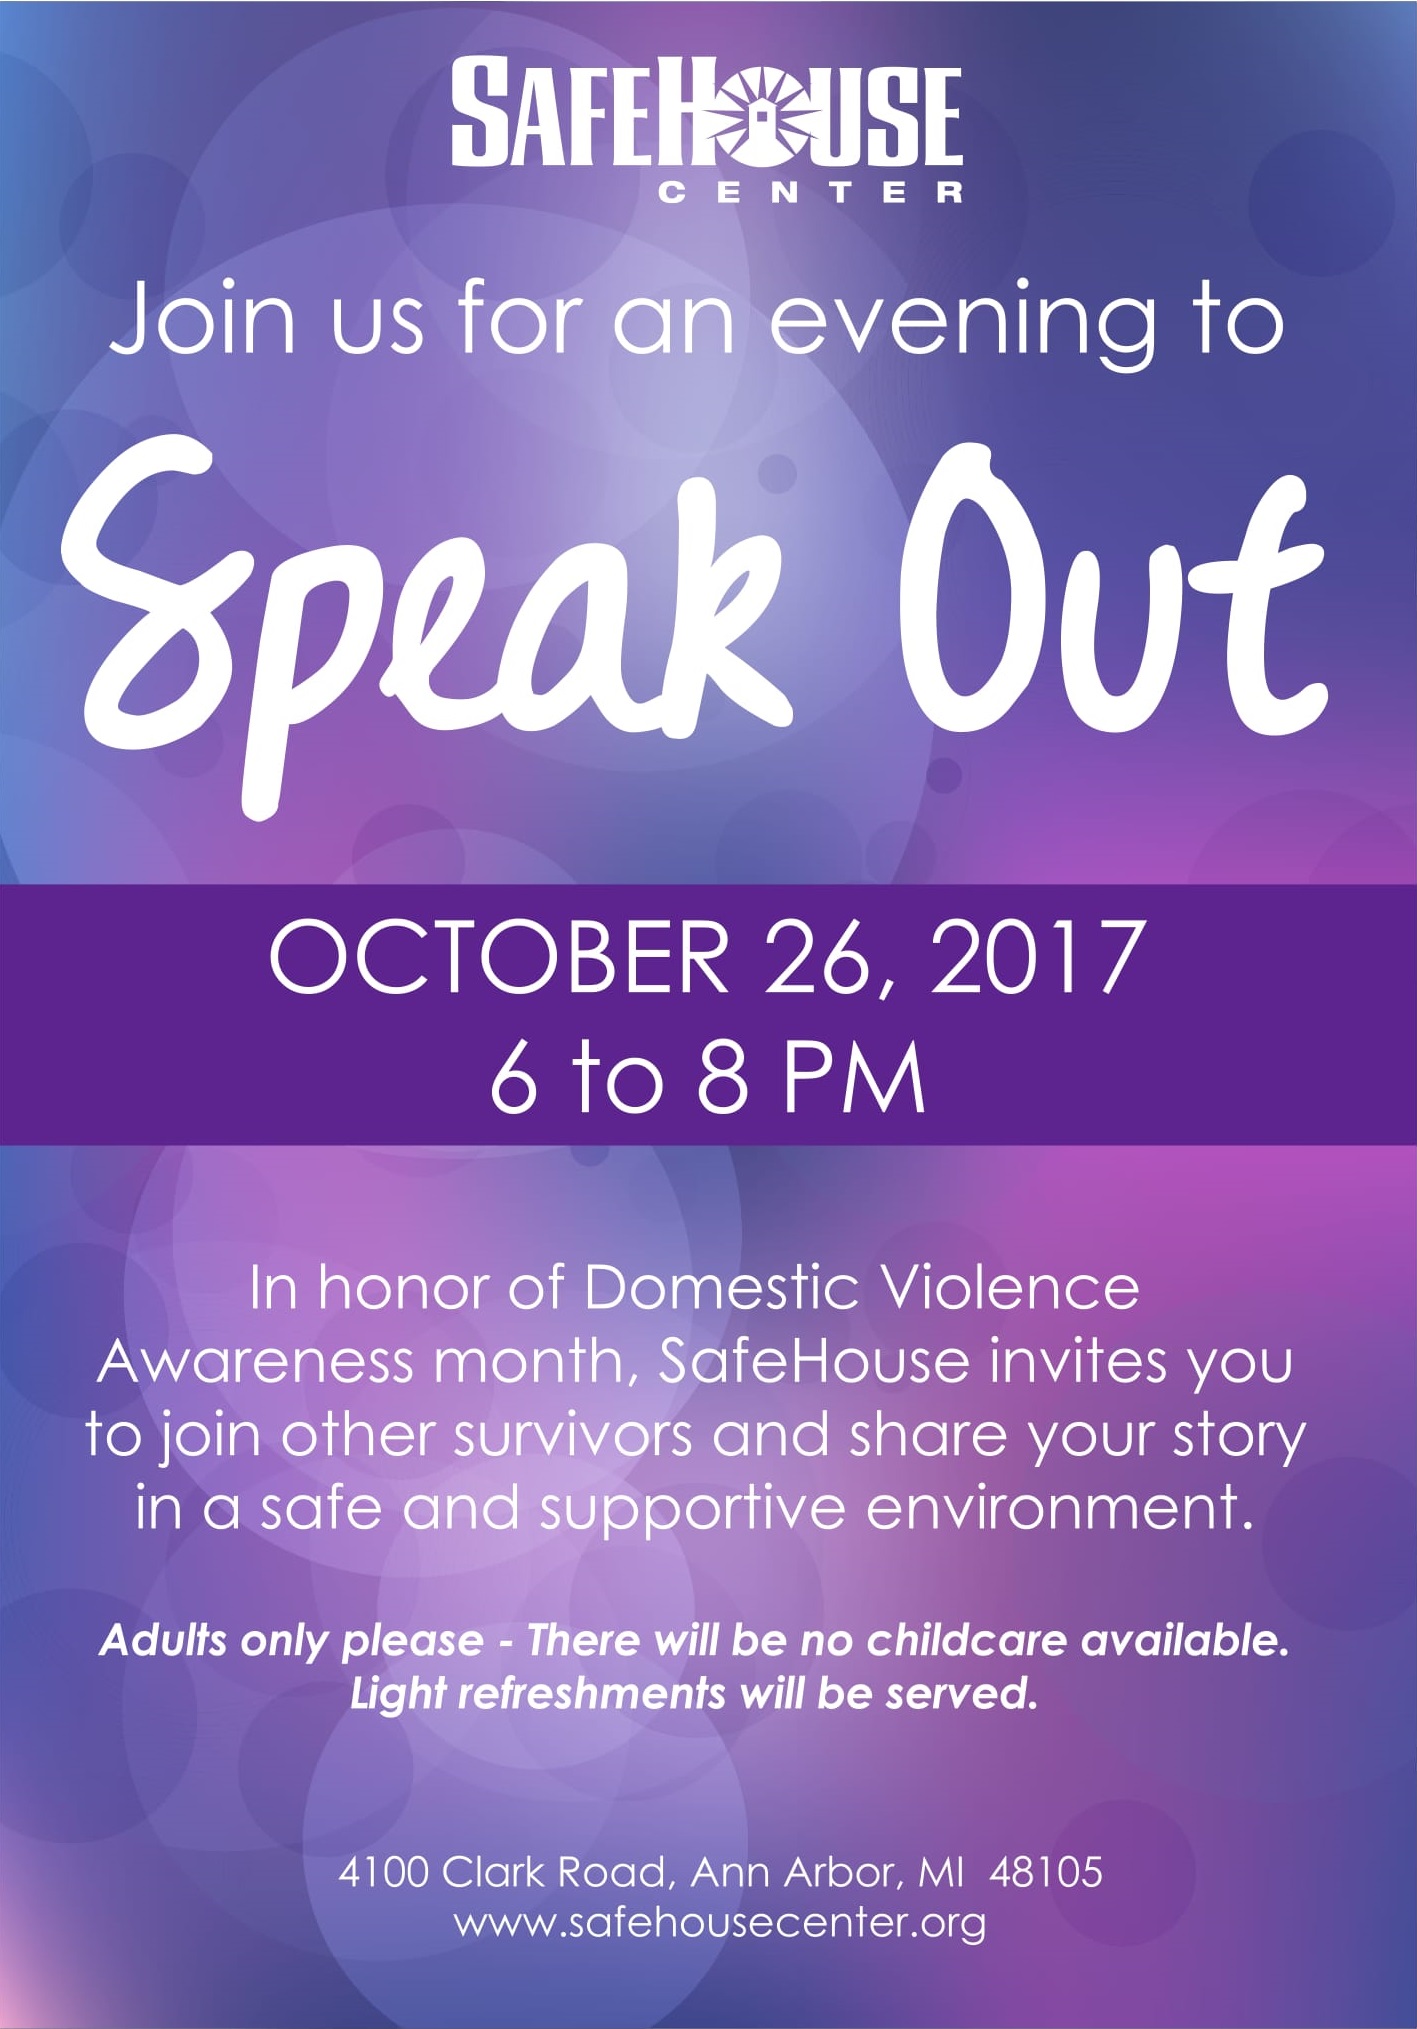 Building Communities Free Of Domestic Violence And Sexual Assault Safehouse Center Safehouse 6852